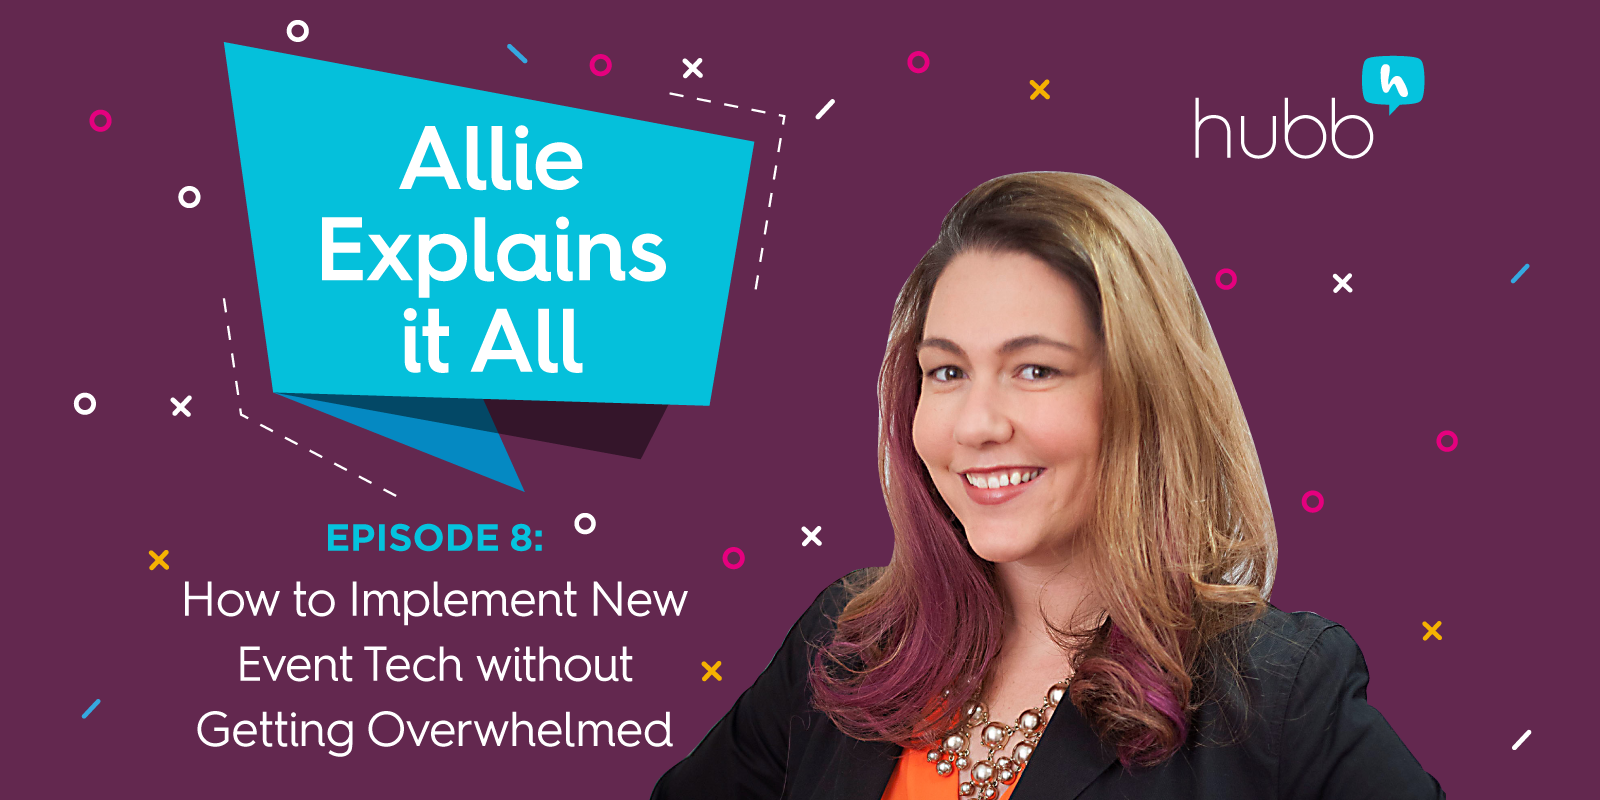 Allie Explains It All, Episode 8: How to Implement New Event Tech without Getting Overwhelmed